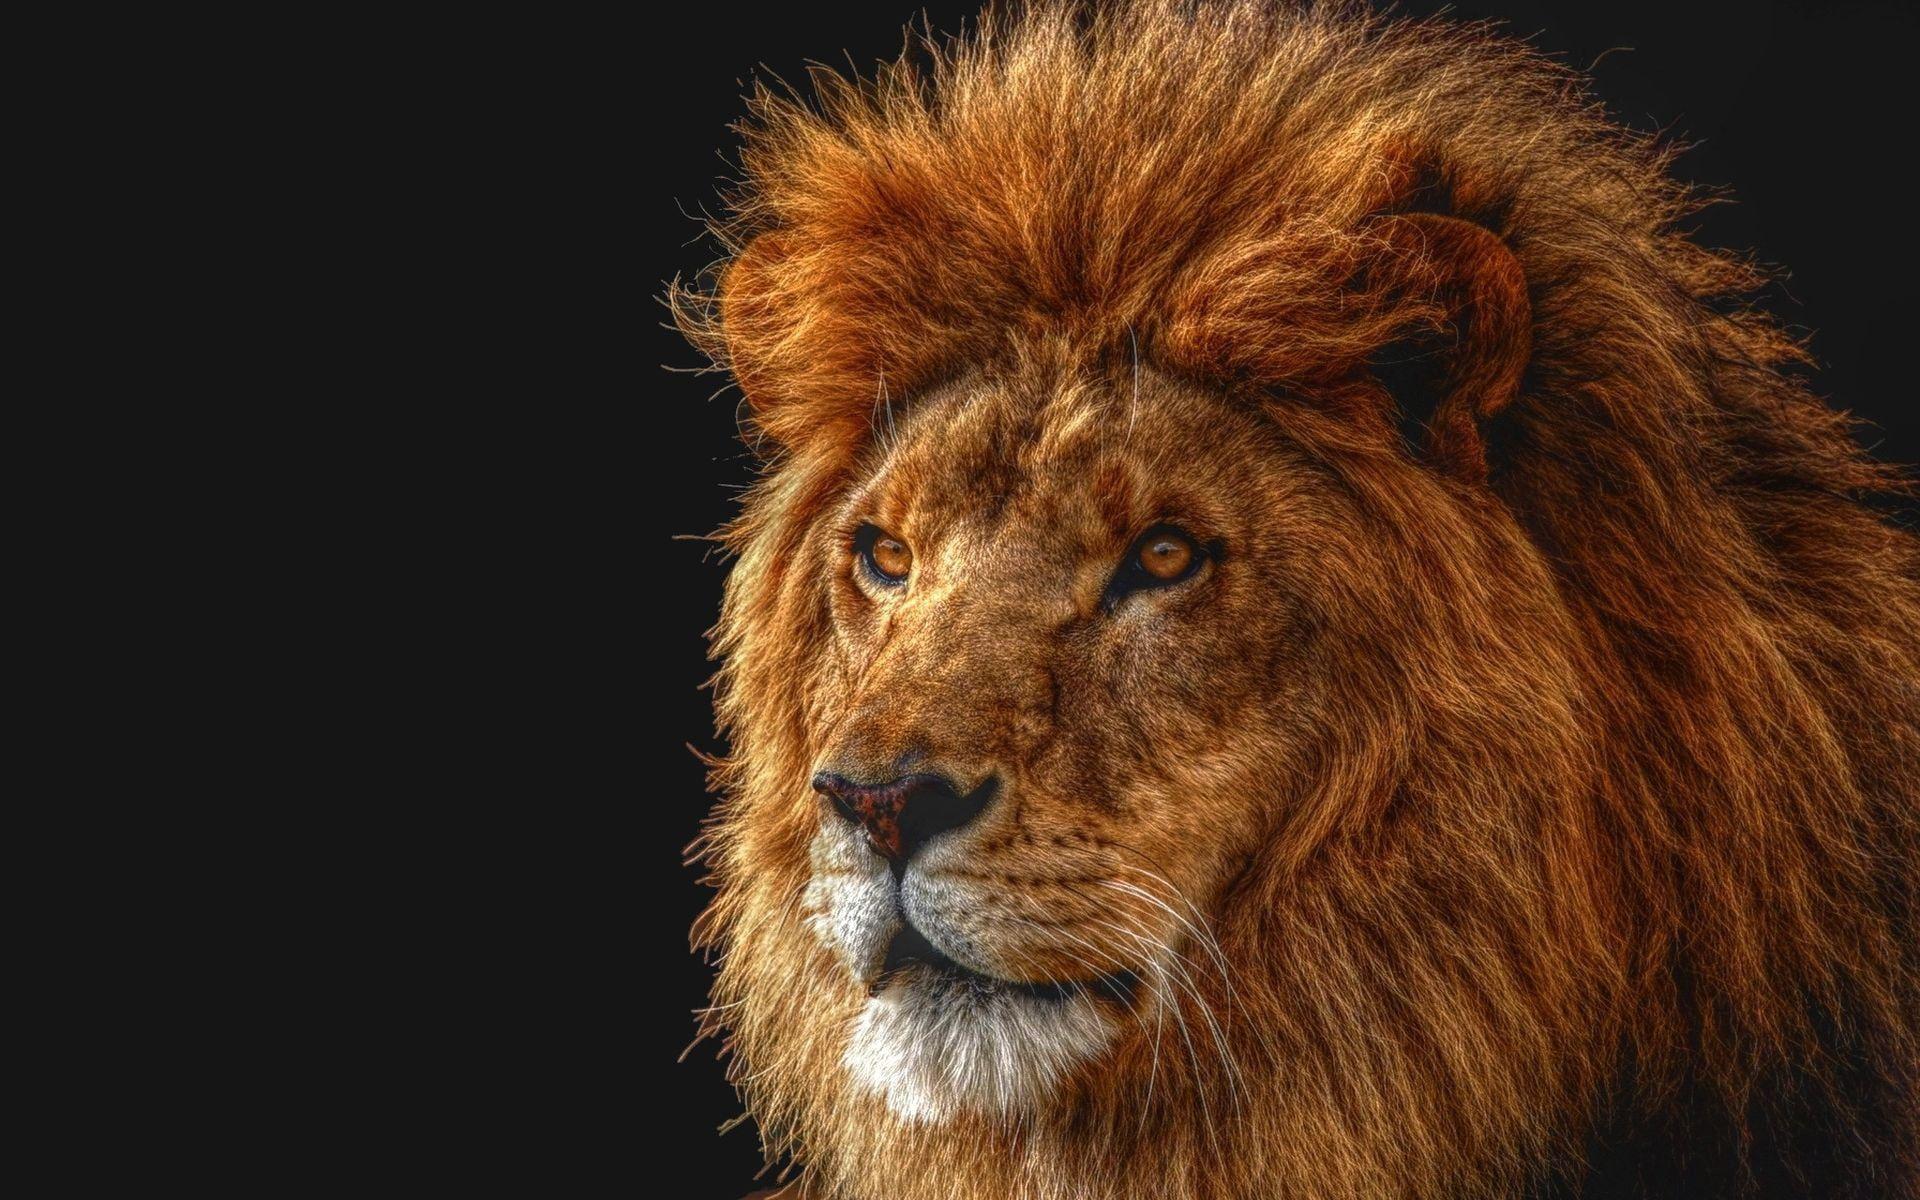 Selective focus photography of Lion's face HD wallpaper. Wallpaper